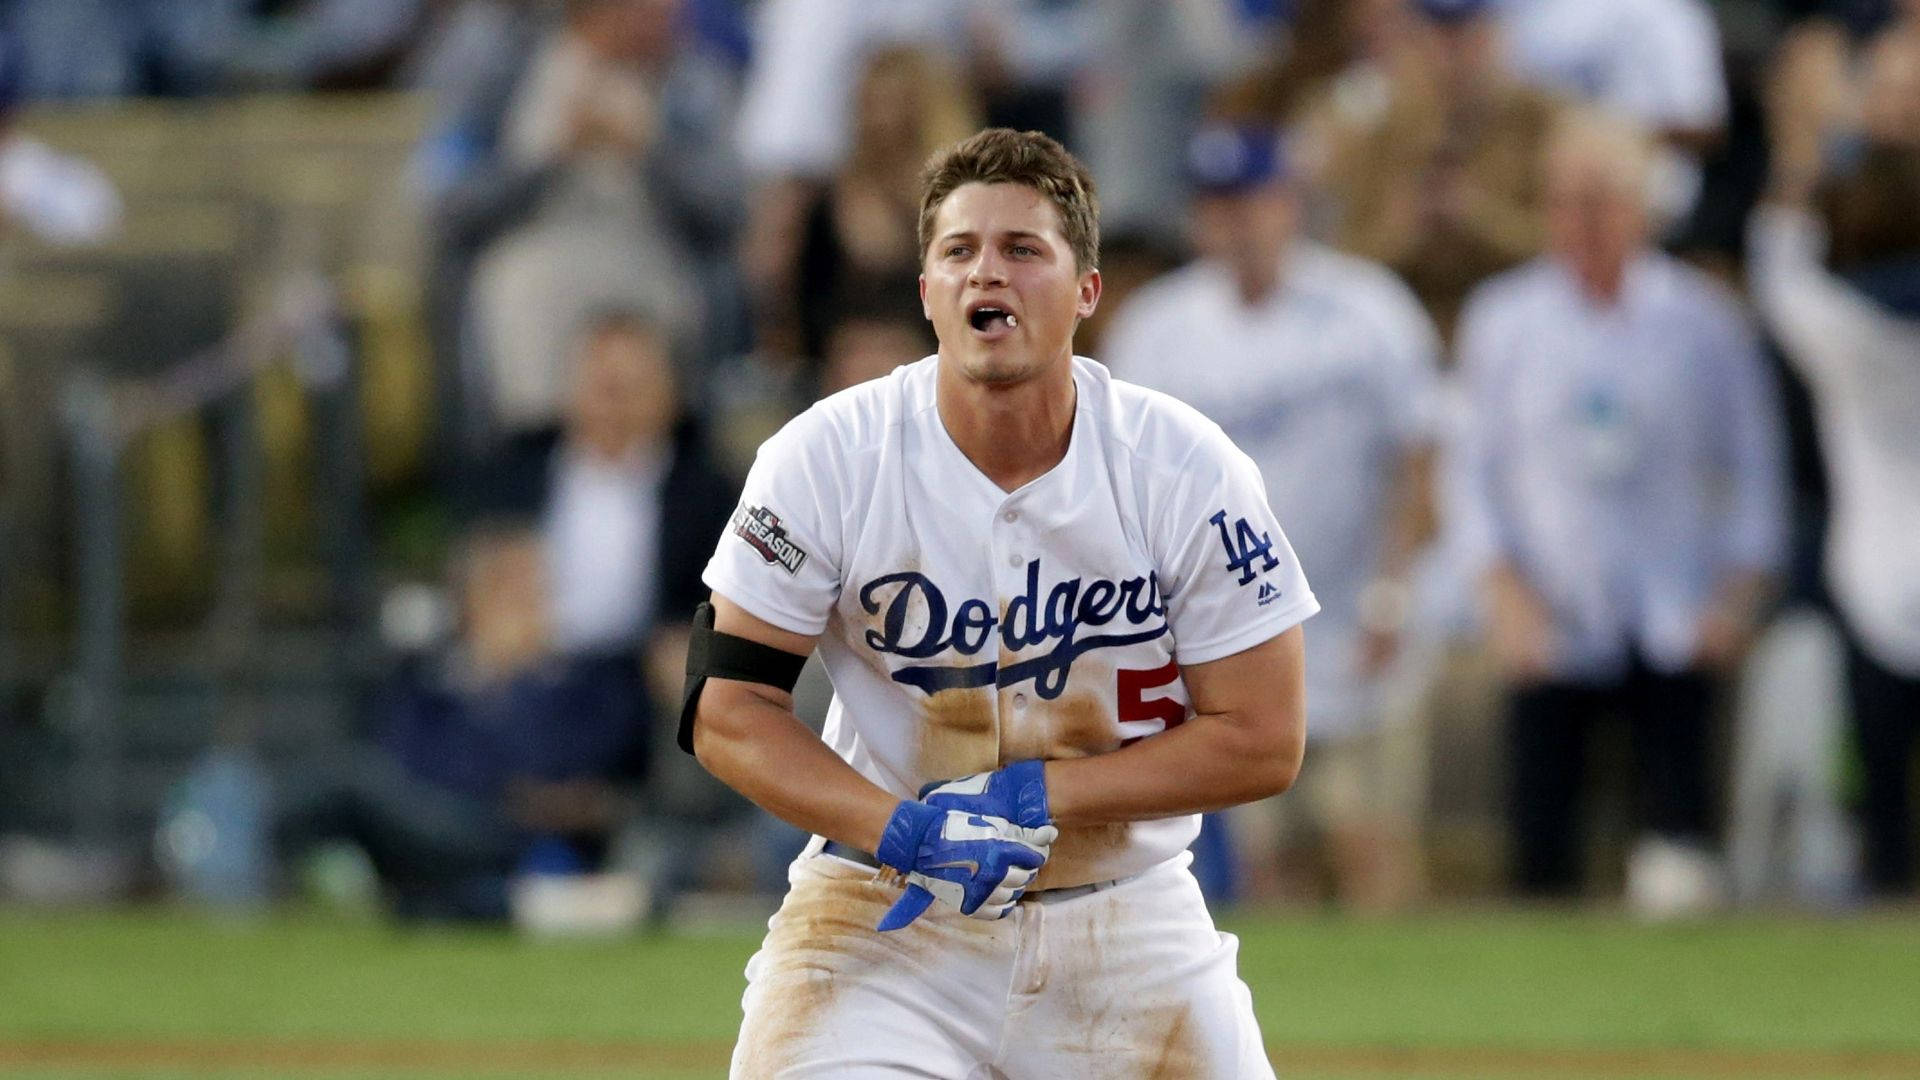 Download Corey Seager Crouching In Dirty Shirt Wallpaper